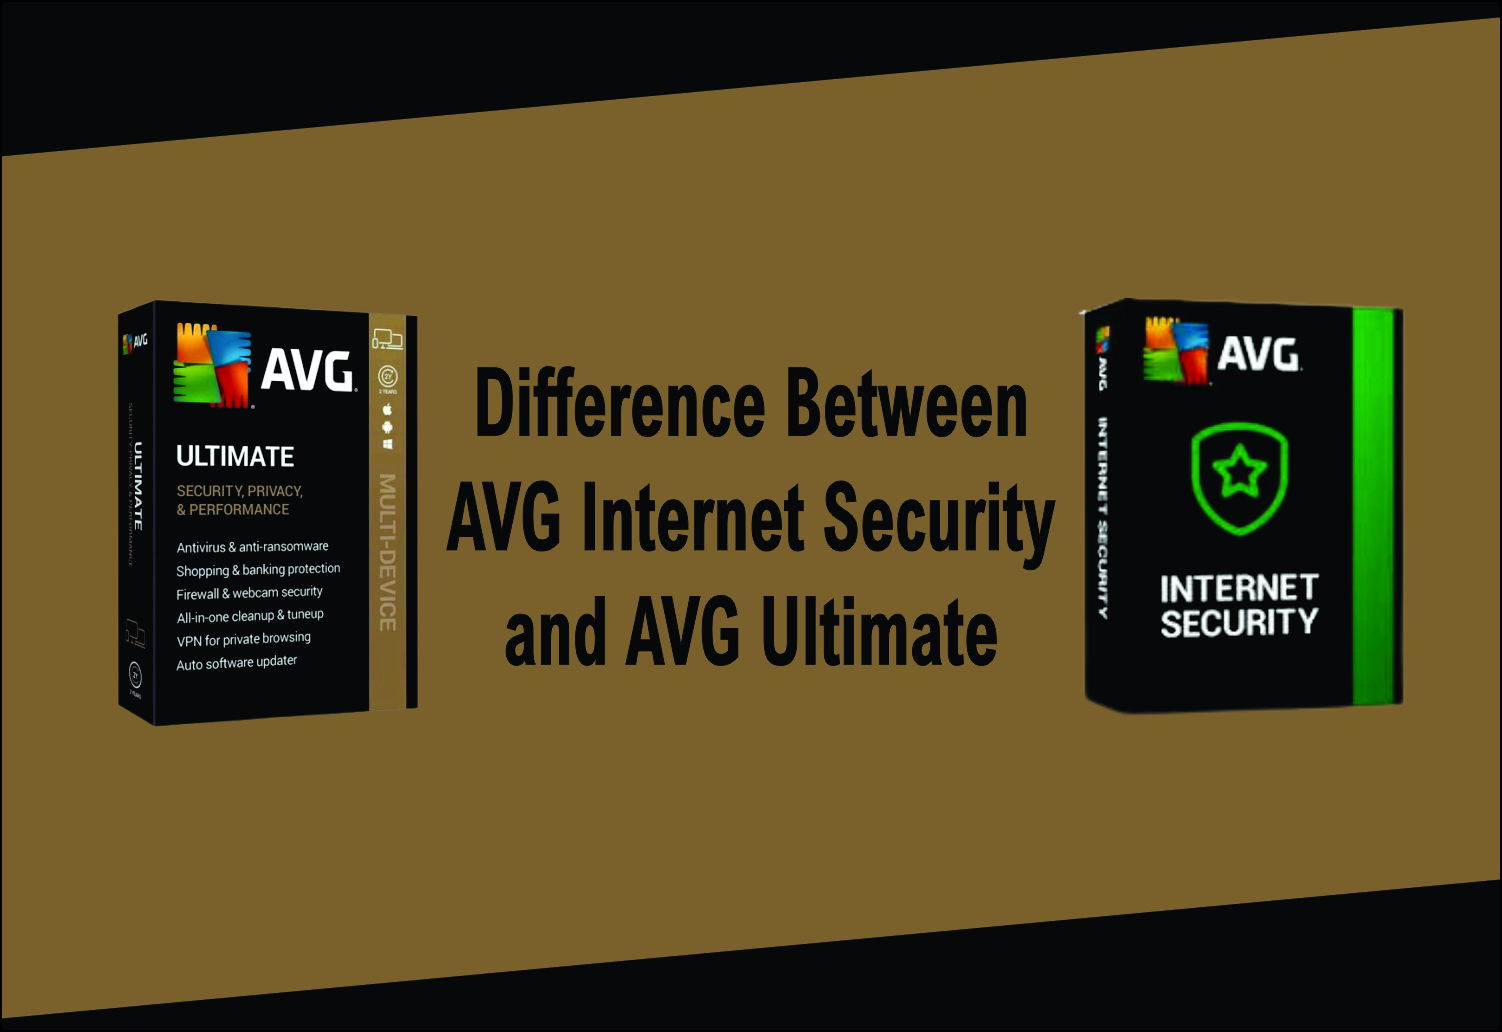 Difference-between-avg-internet-security-and-avg-ultimate